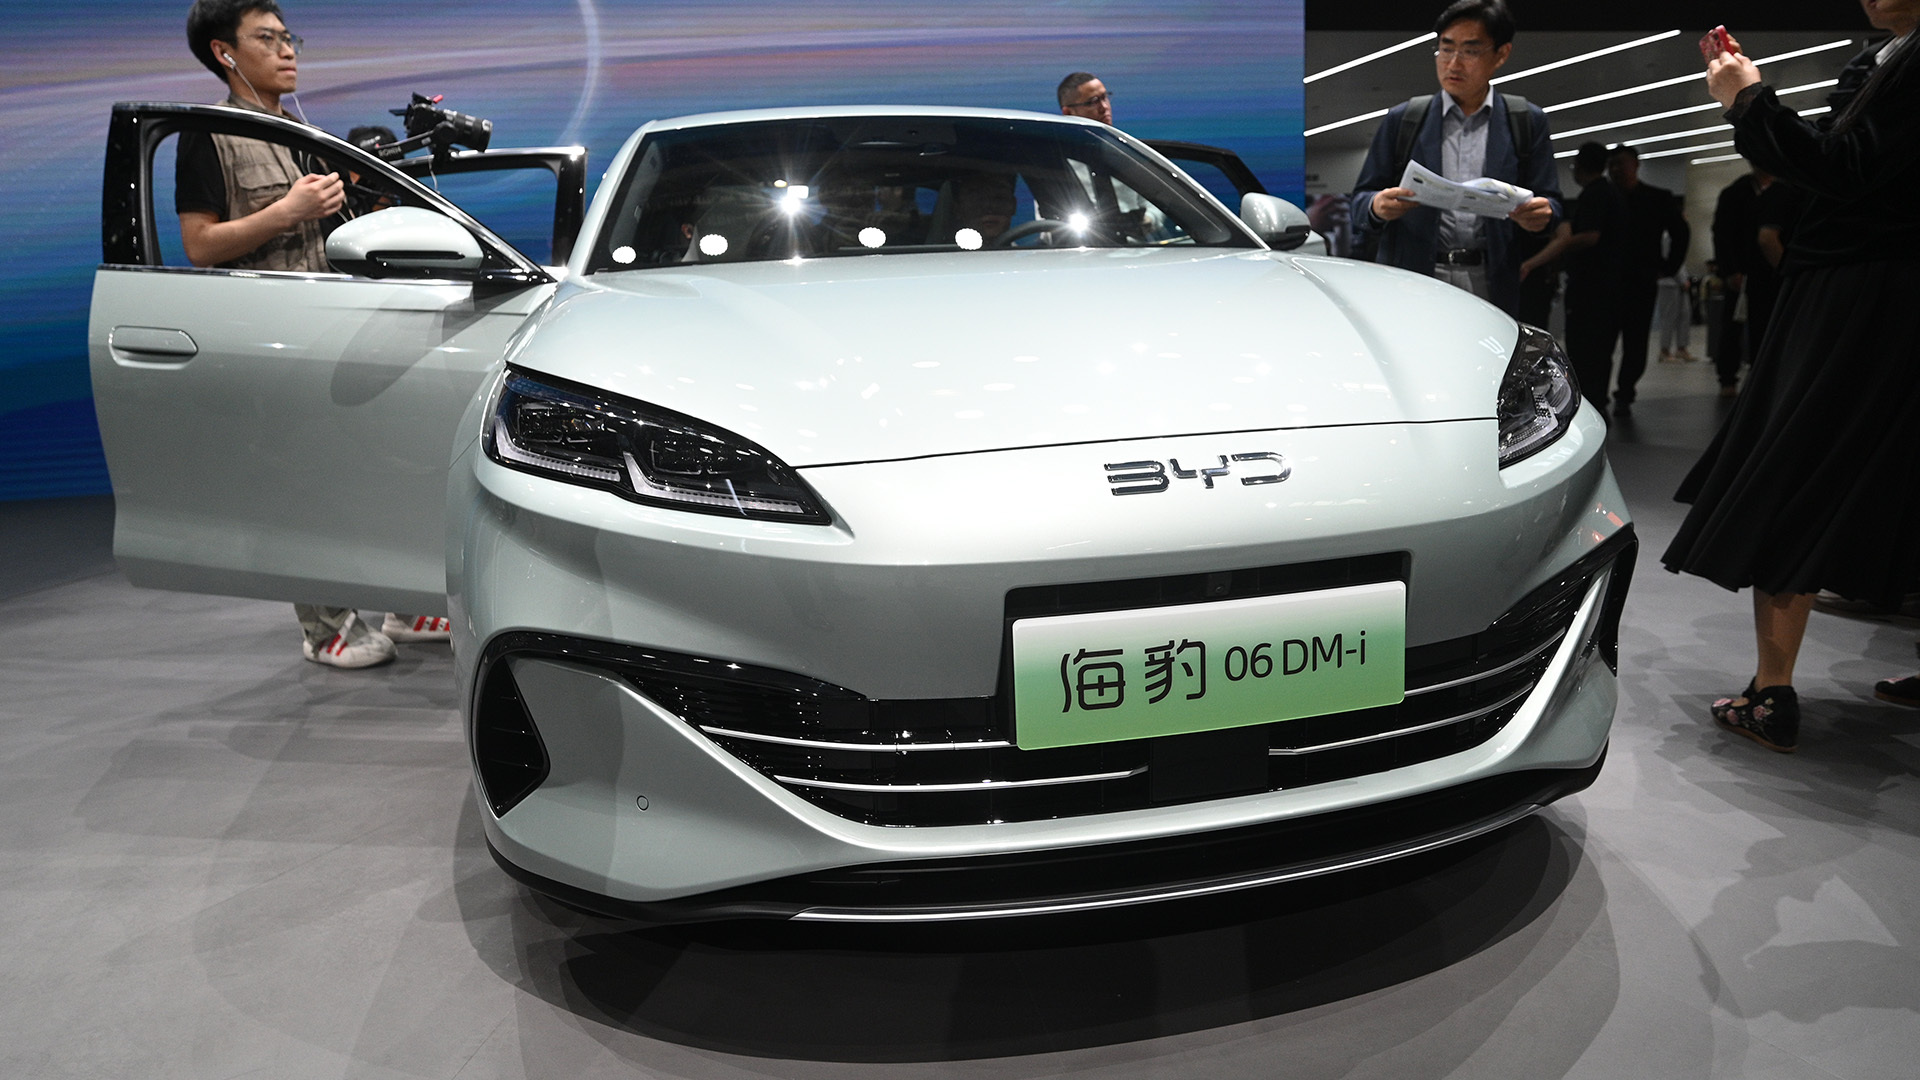 A new hybrid vehicle from Chinese automaker BYD can travel over 1,300 miles without stopping and it is priced at just ,775.